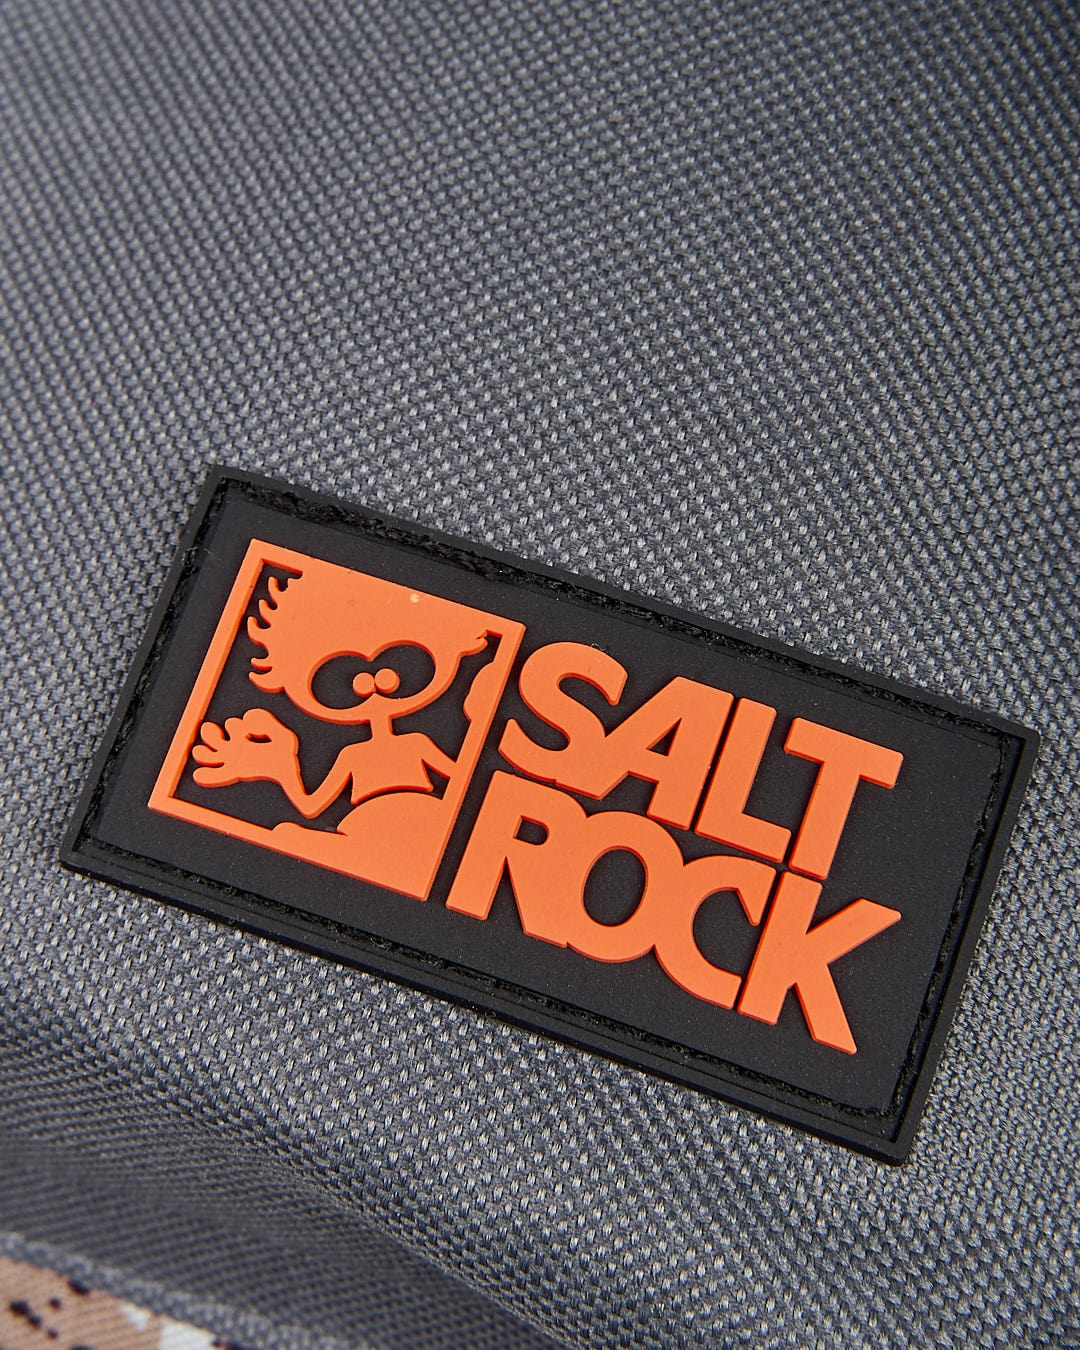 A close up of a Uni-Camo backpack with the Saltrock logo on it.